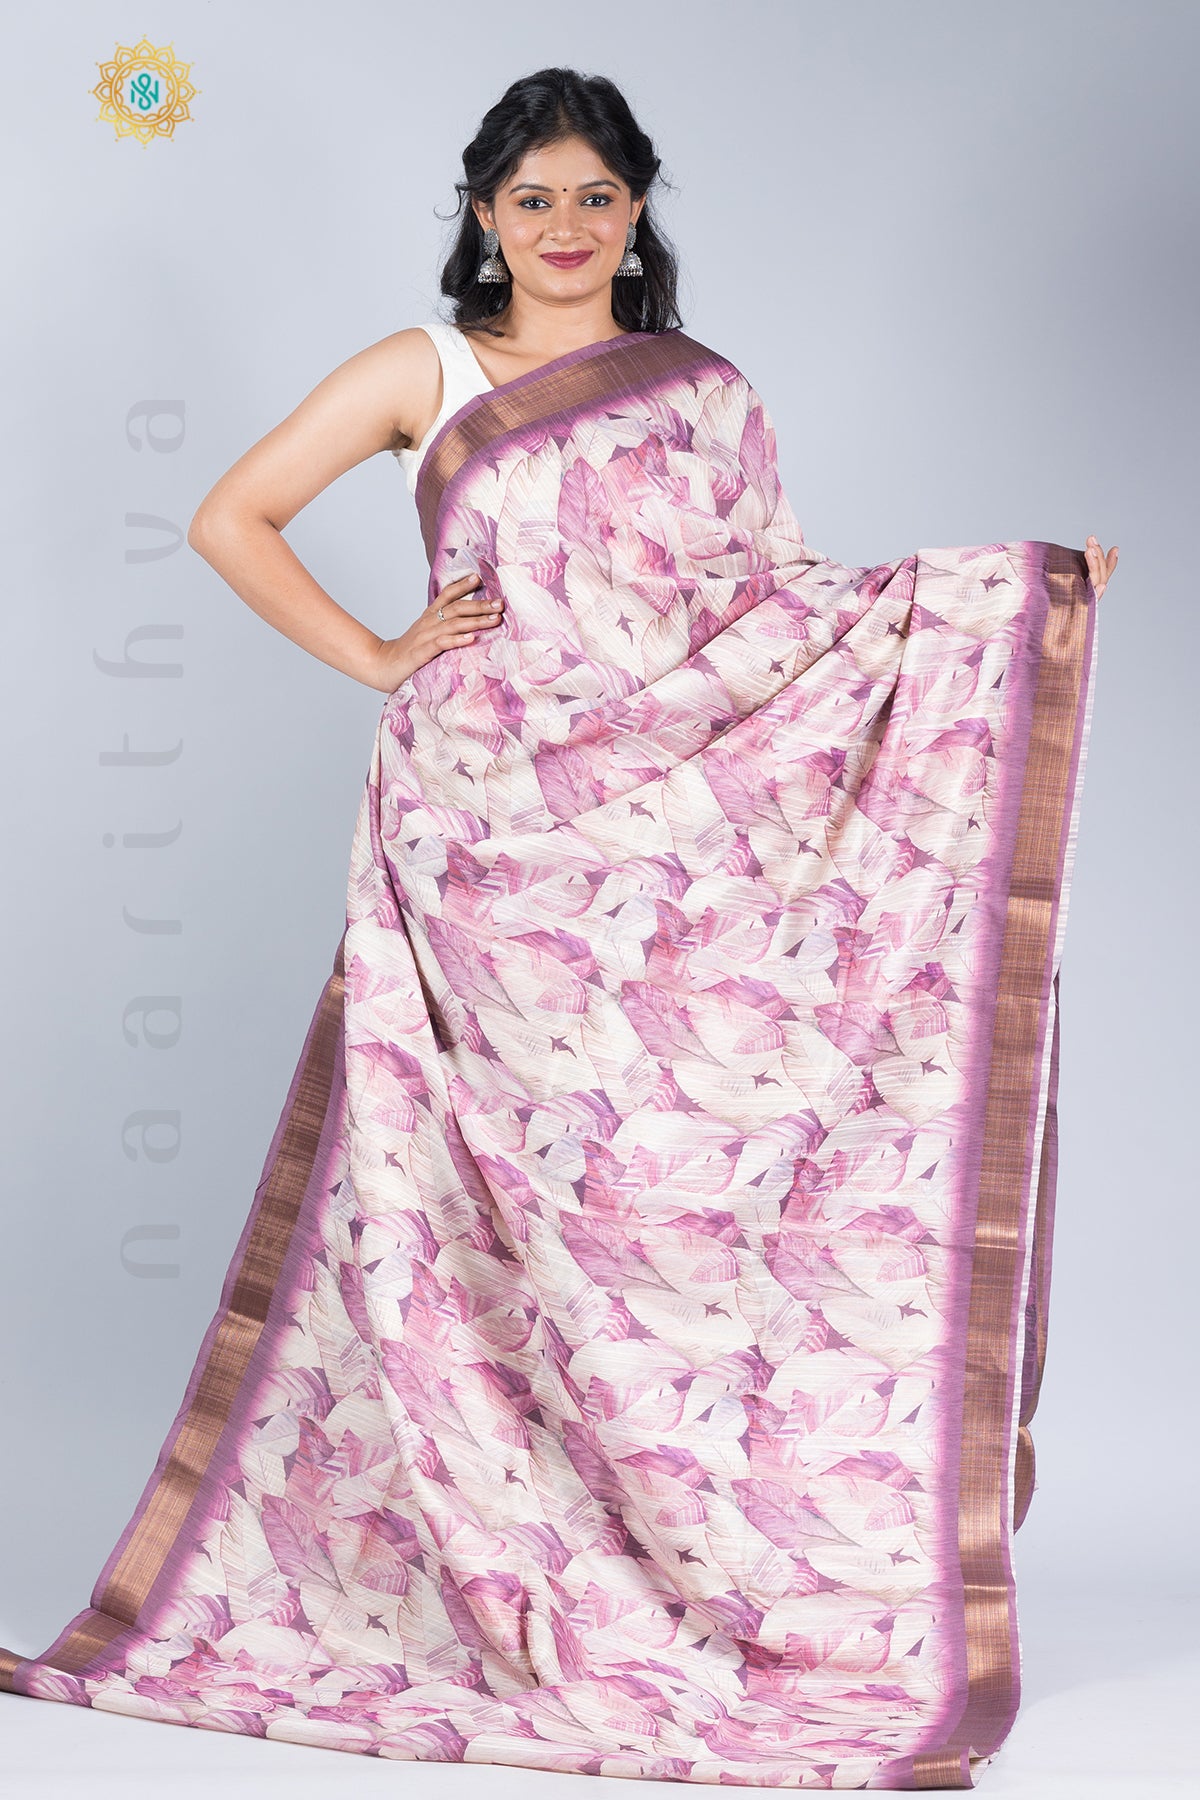 OFF WHITE WITH LAVENDER - KOTHA LINEN WITH DIGITAL PRINTS ON THE BODY & TISSUE BORDER